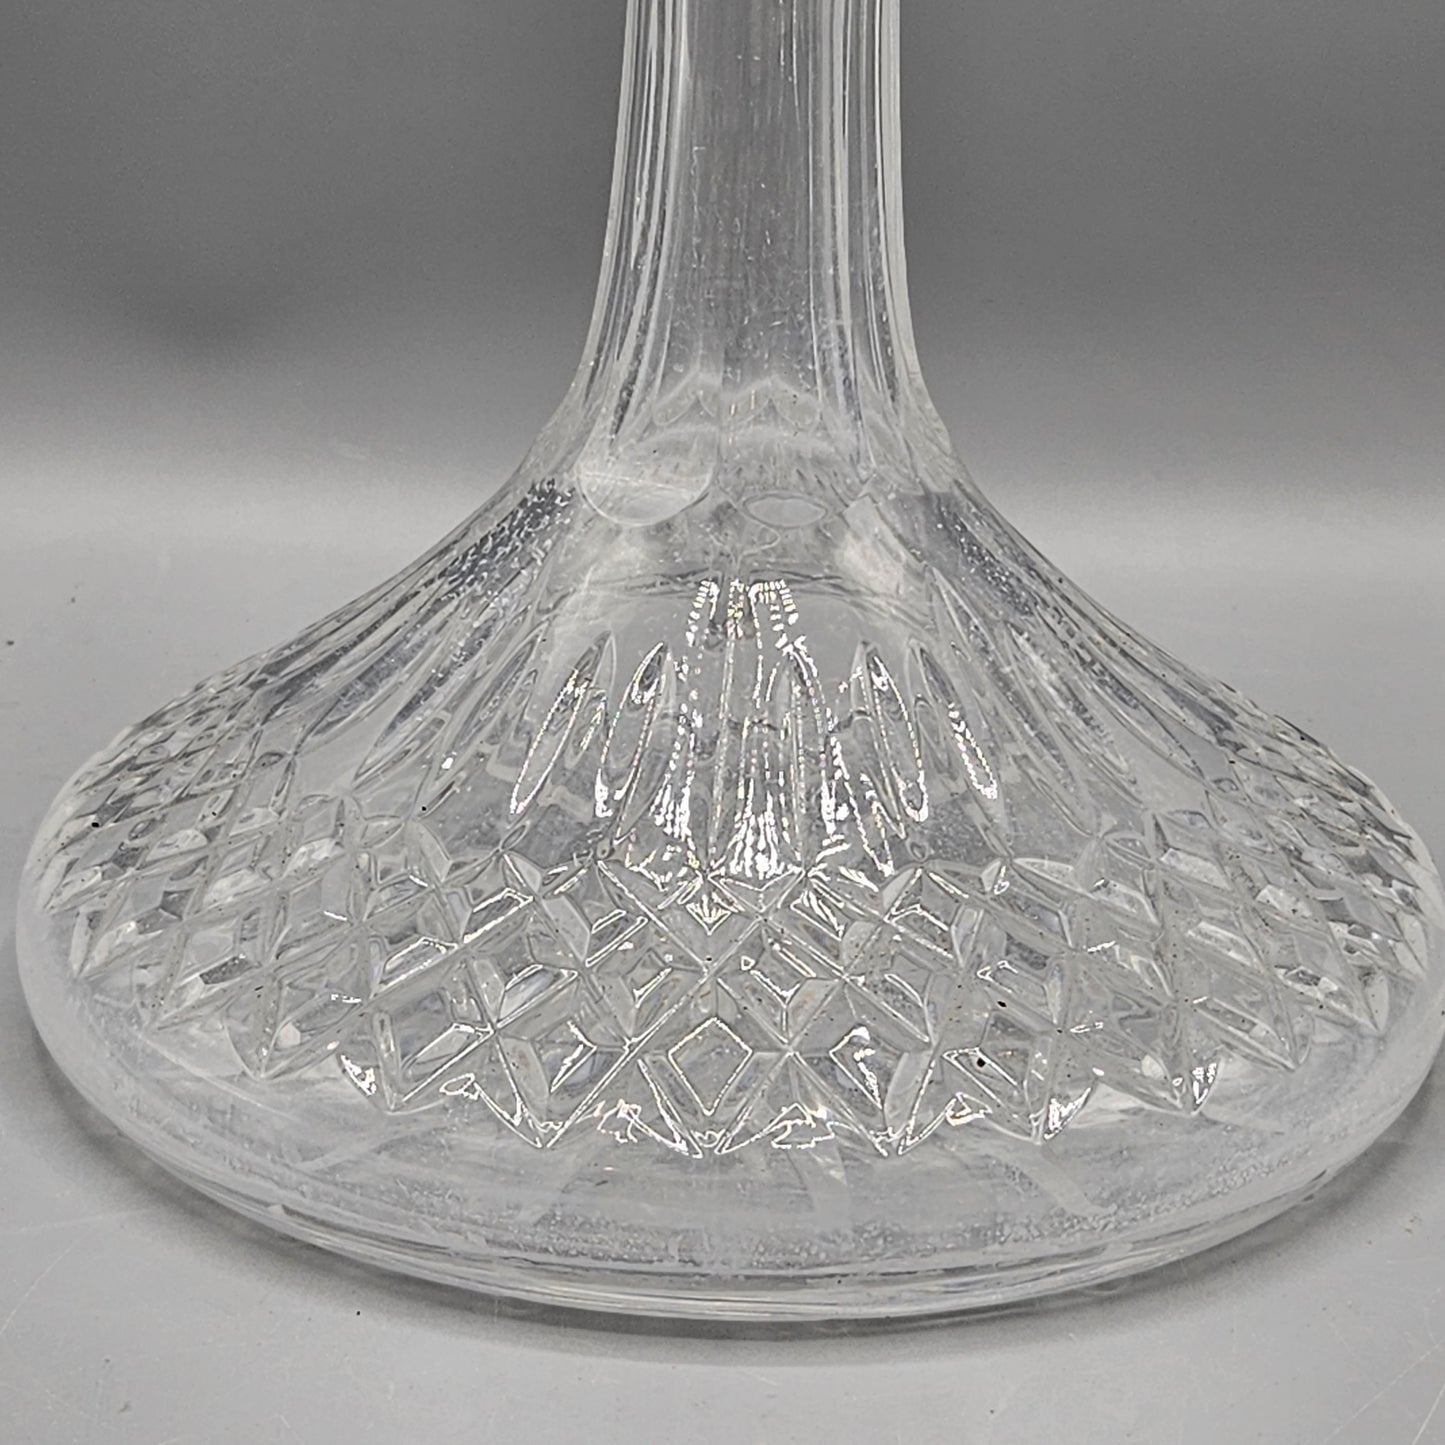 Waterford Crystal Lismore Ships Decanter